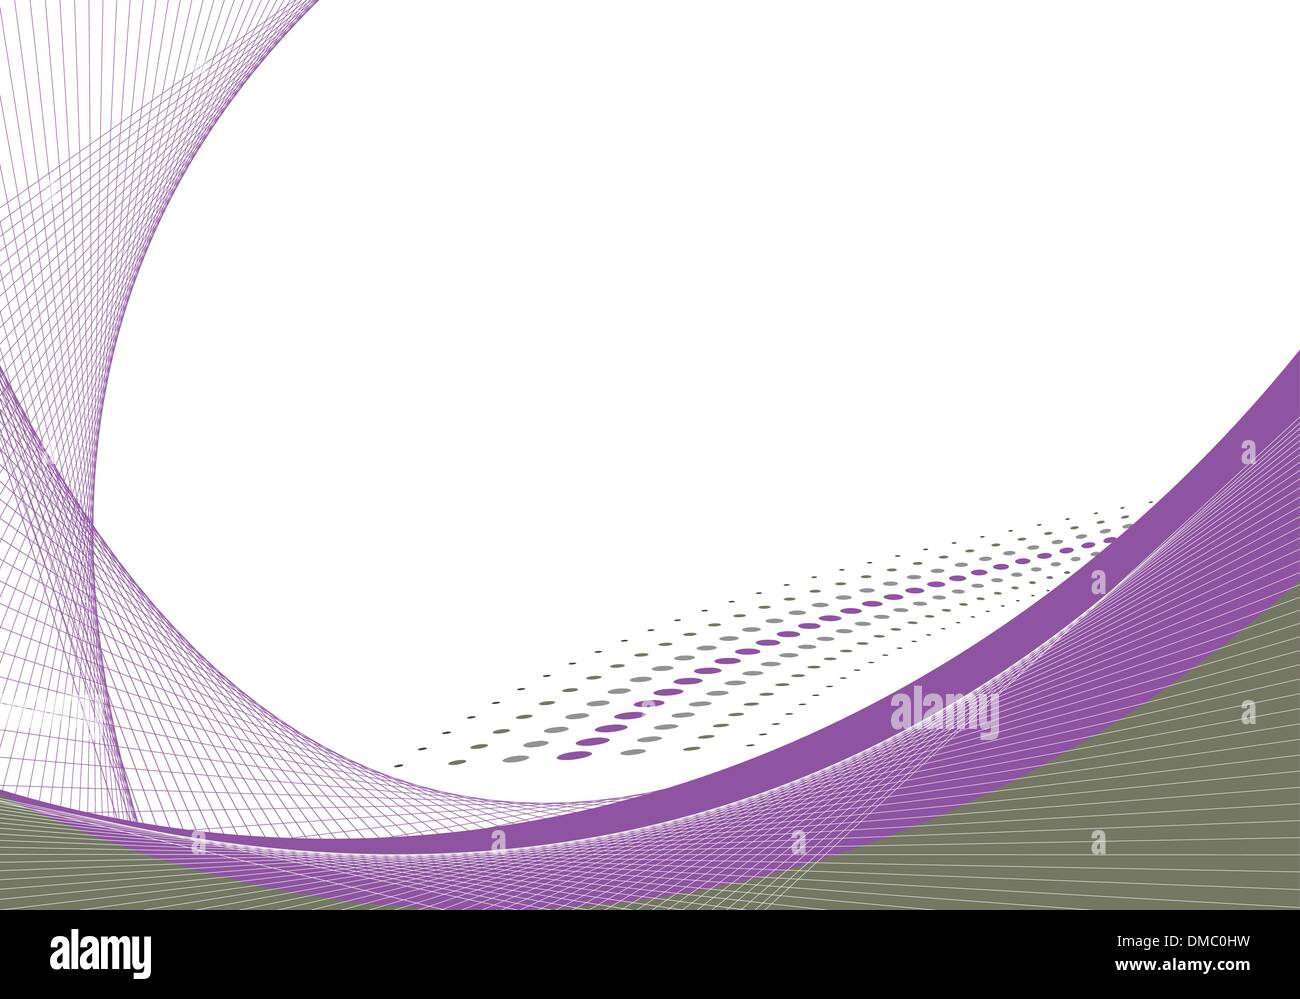 Violet-gray background, overflowing of lines Stock Vector